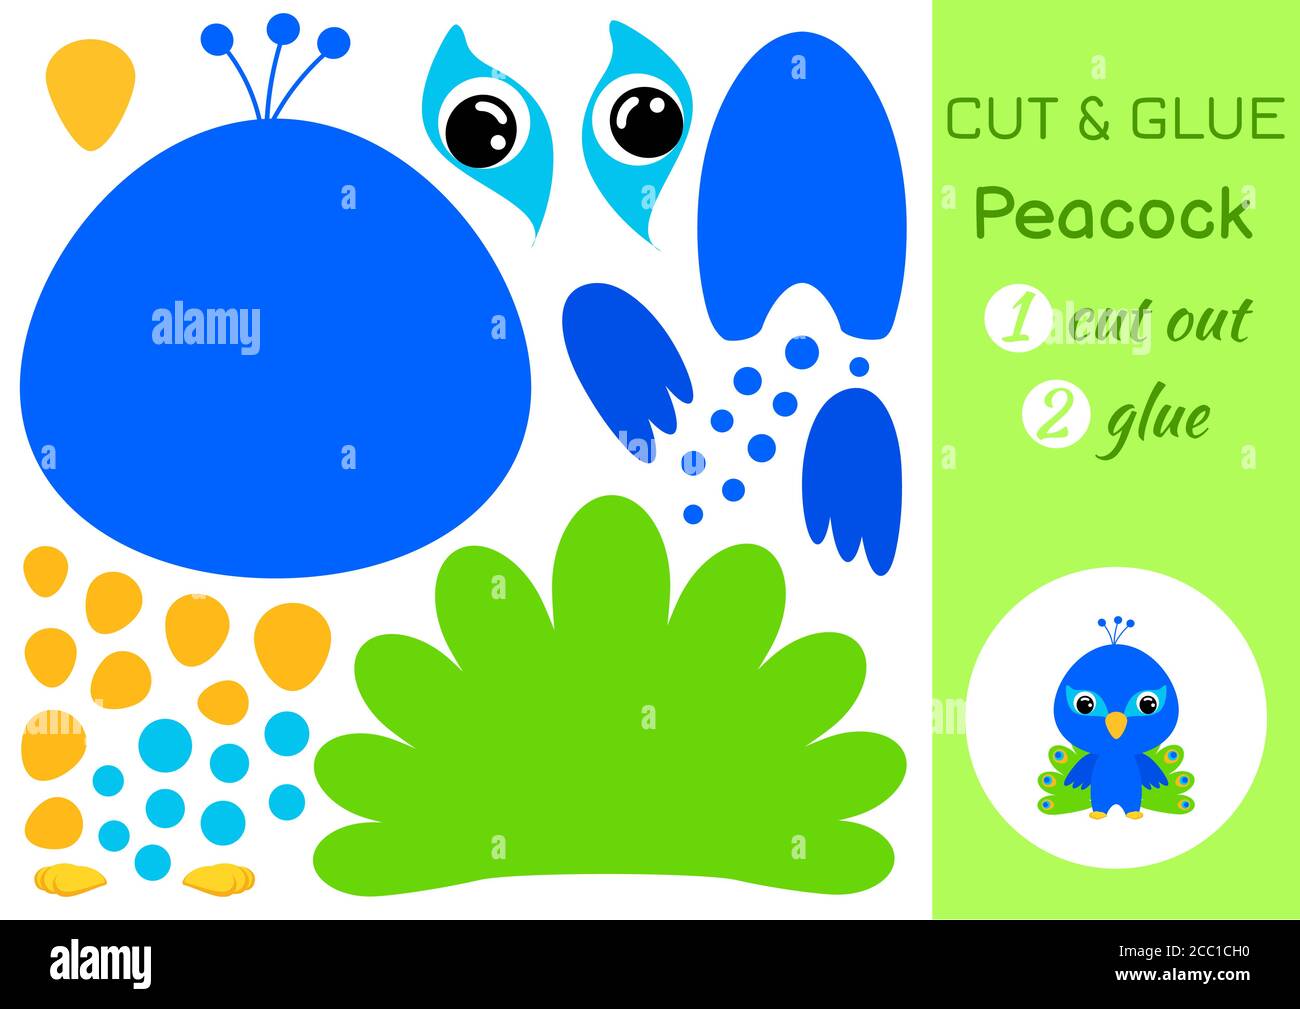 cut-and-glue-baby-peacock-education-developing-worksheet-color-paper-game-for-preschool